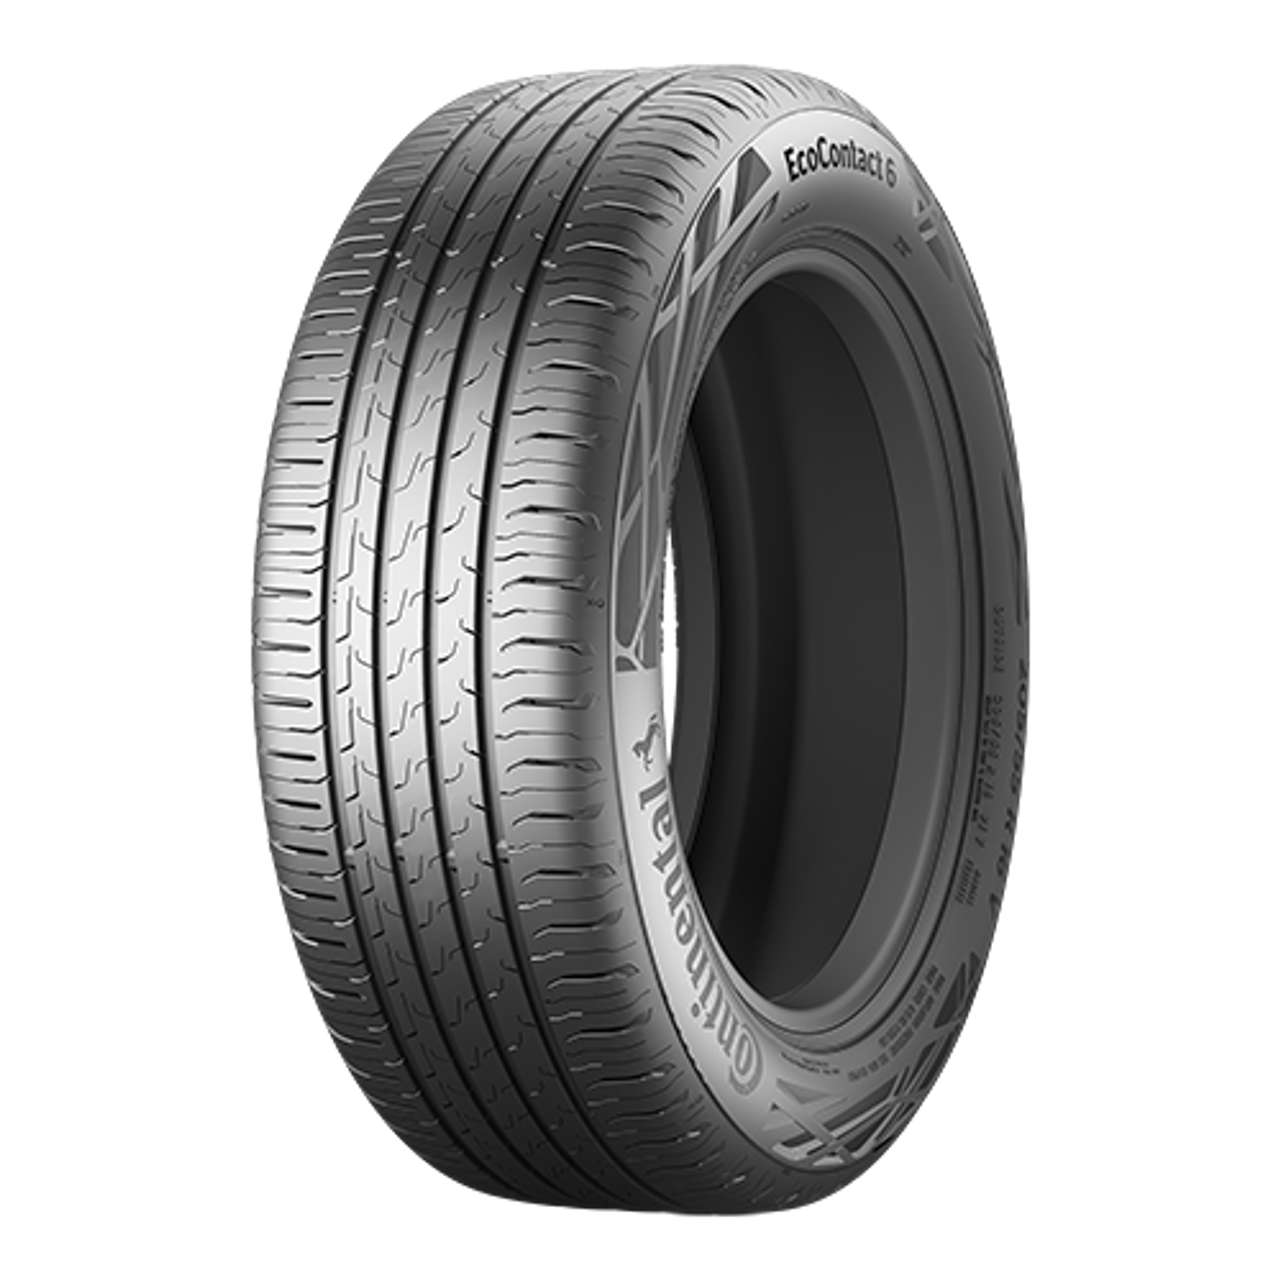 CONTINENTAL ECOCONTACT 6 (EVc) 225/45R17 91V BSW